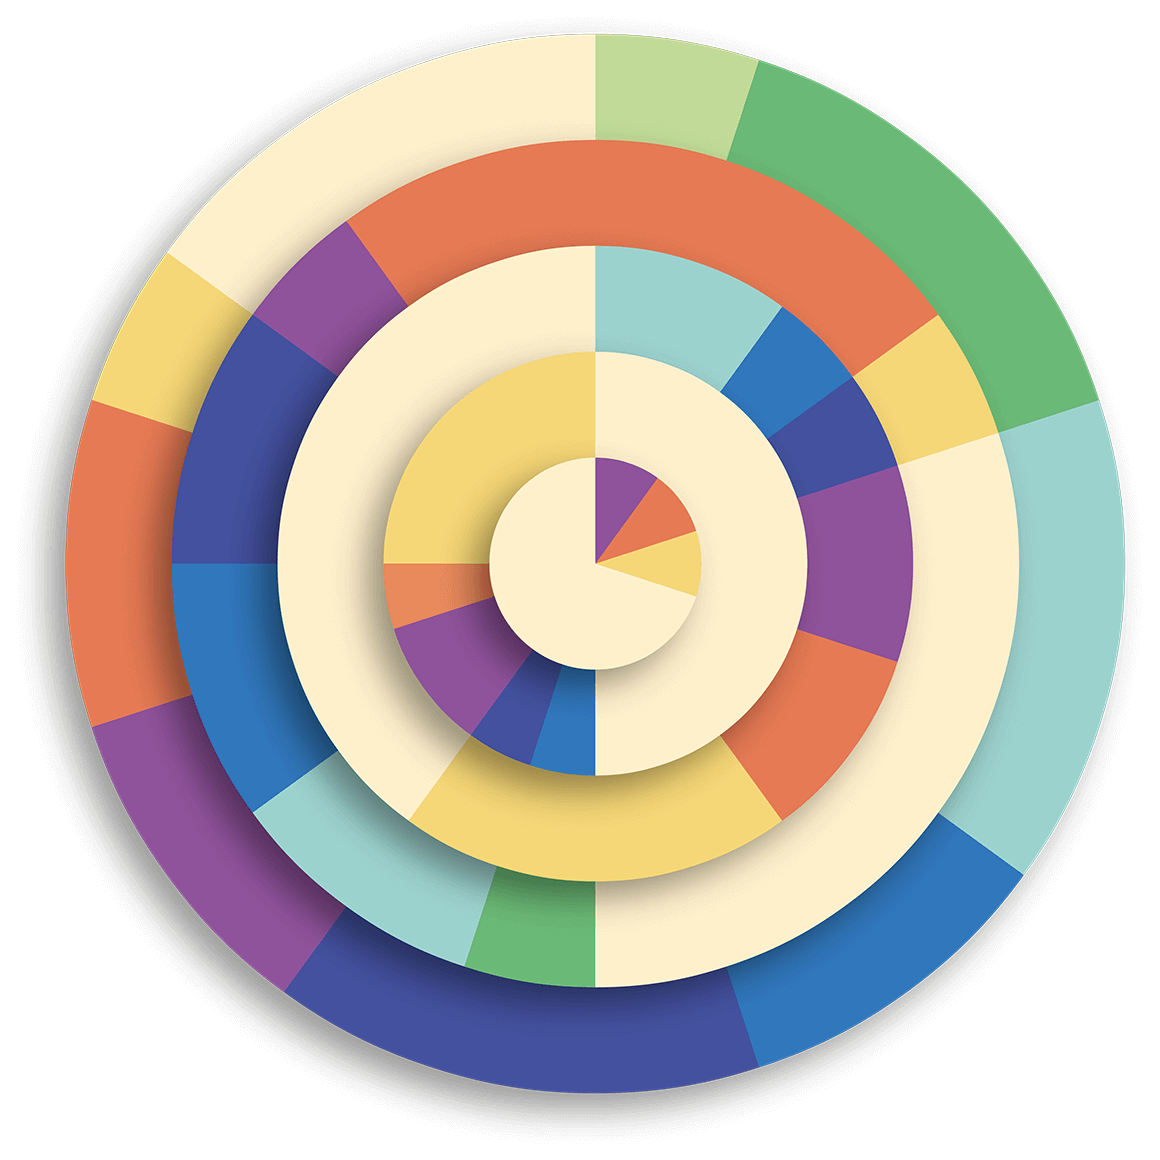 Circles of colour blocks inside other circles of coloured blocks.